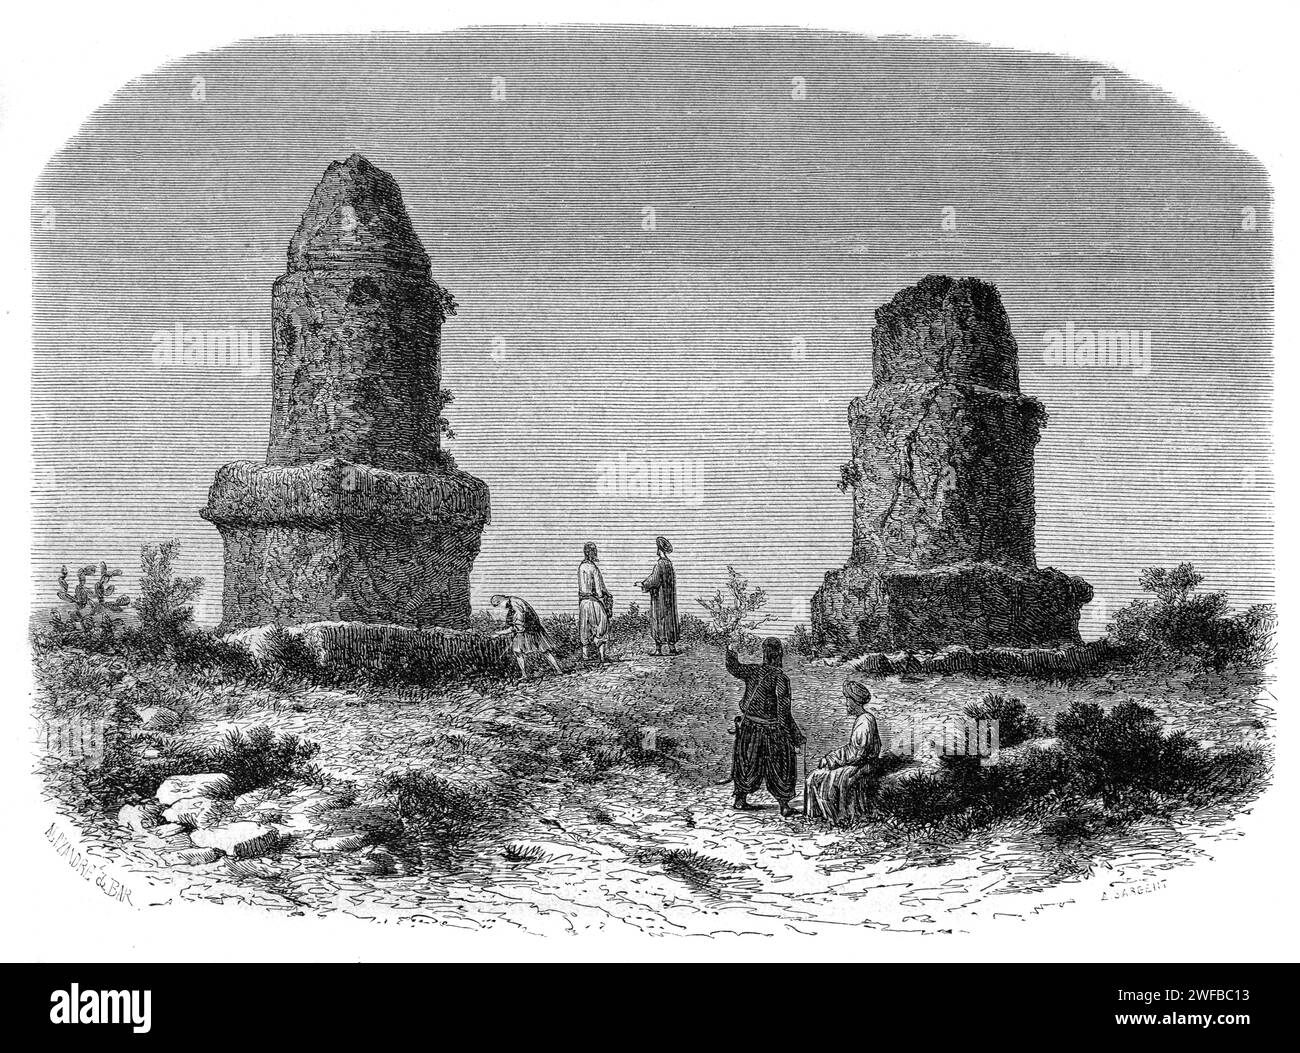 The Al Maghazil Burial Towers, known as The Spindles,  in the Amrit Necropolis, or c4th BC Phoenician Monuments, Amrit, or in Classical Times Marathus, near Tartus Syria. Vintage or Historic Engraving or Illustration 1863 Stock Photo